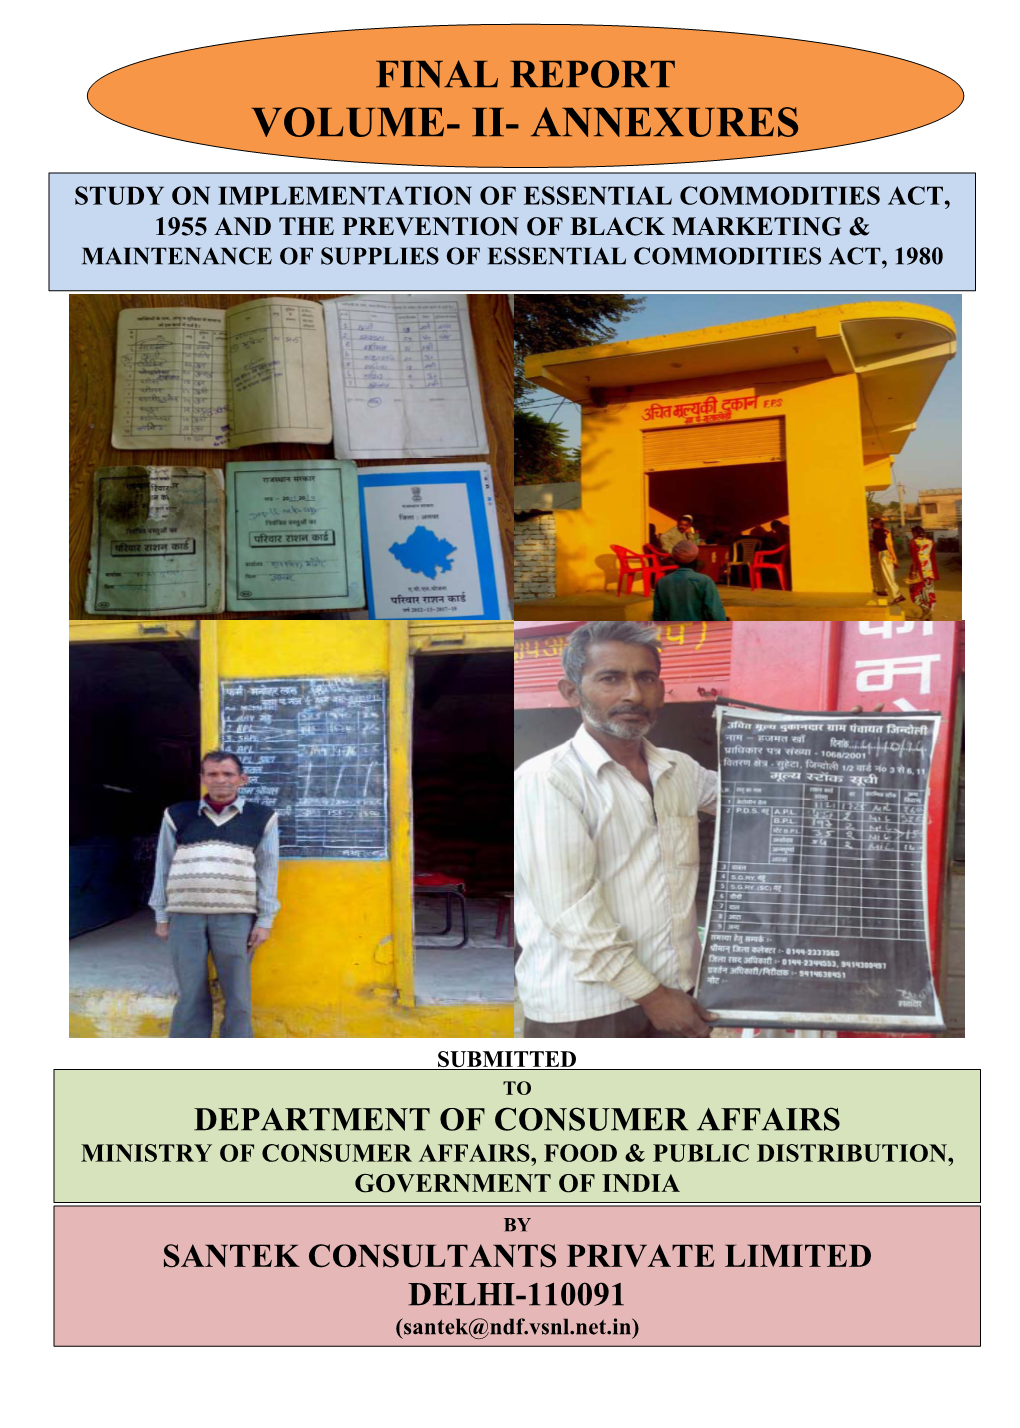 Study on Implementation of Essential Commodities Act, 1955 and the Prevention of Black Marketing